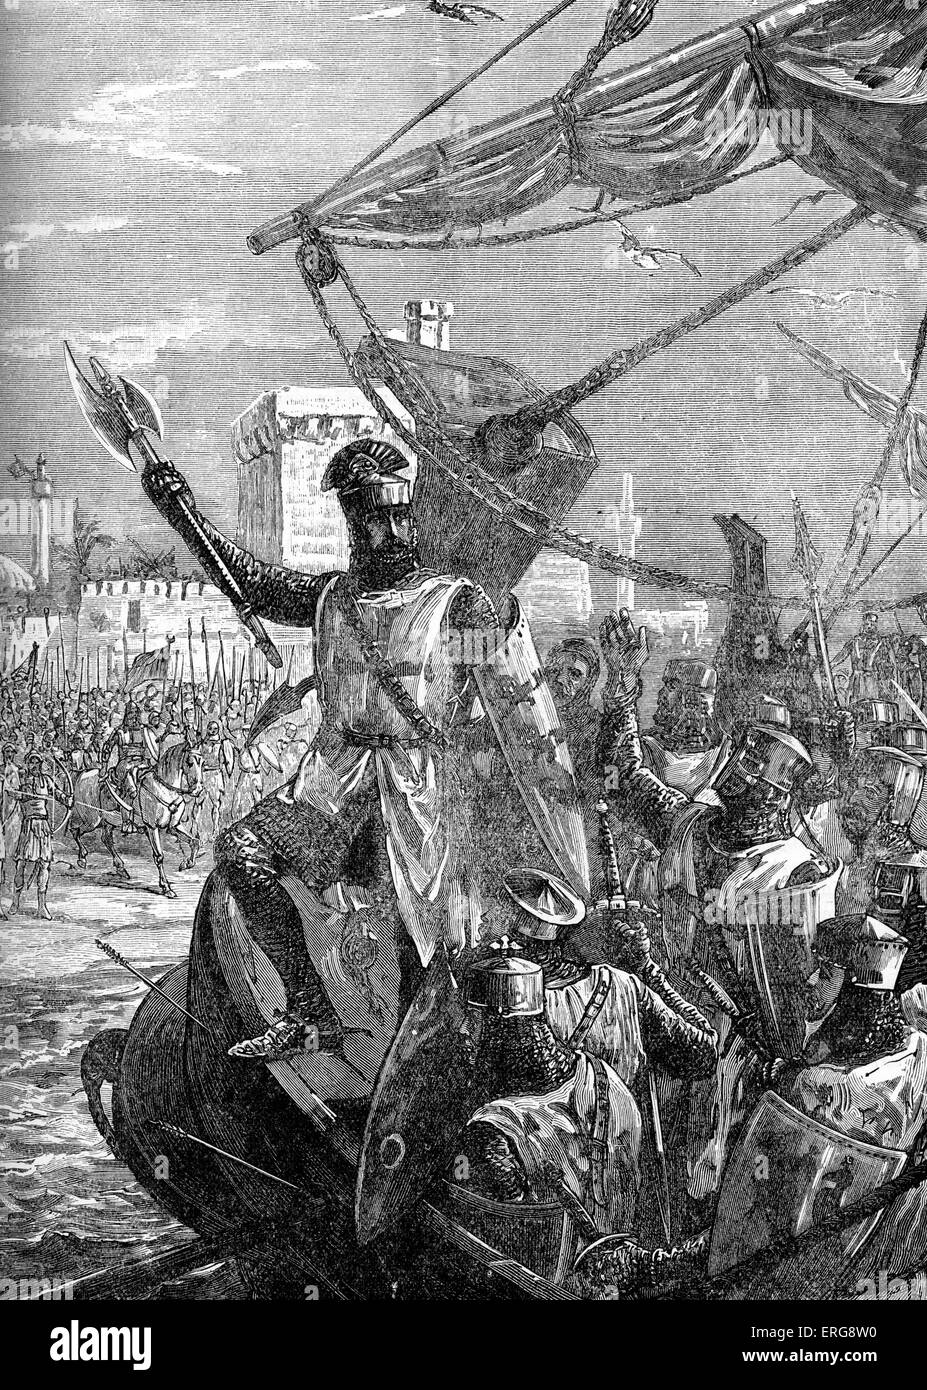 Richard I of England landing at Jaffa. City surrendered to Richard 10 September 1192, three days after Battle of Asruf. During Stock Photo